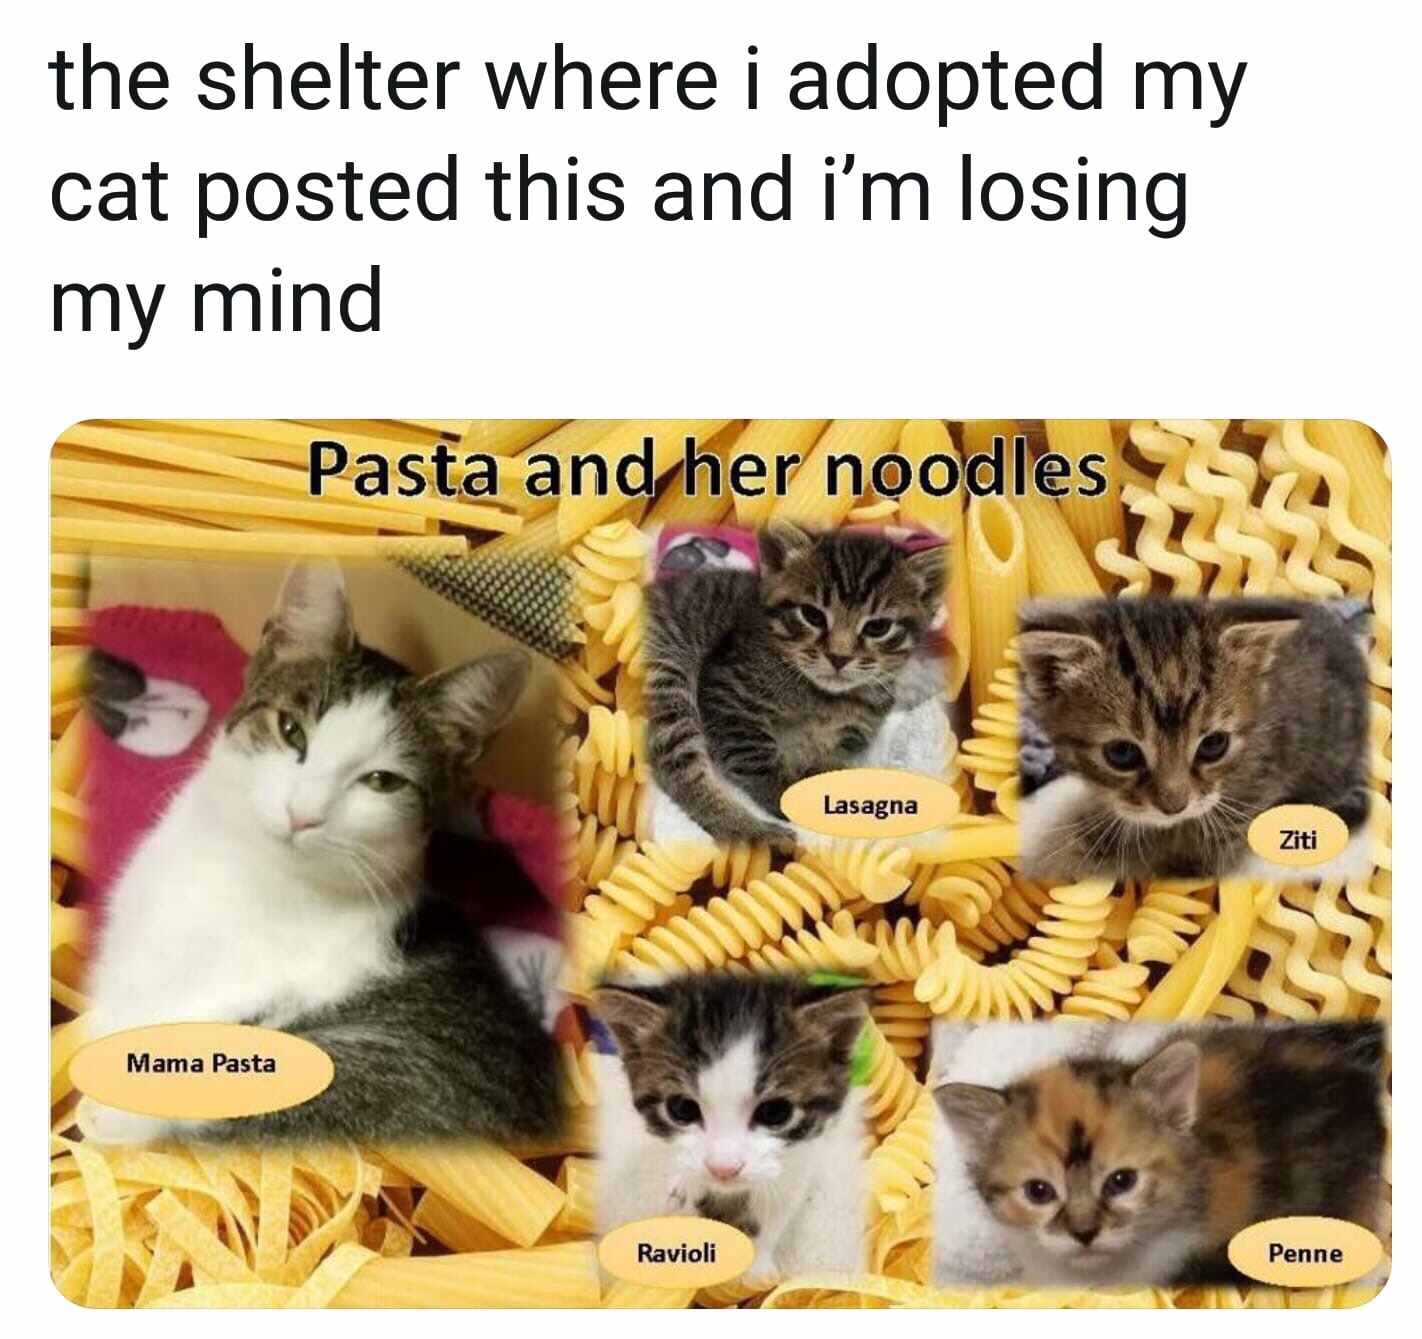 mama pasta and her noodles - the shelter where i adopted my cat posted this and i'm losing my mind Pasta and her noodles, Lasagna Ziti Mama Pasta Ravioli Penne